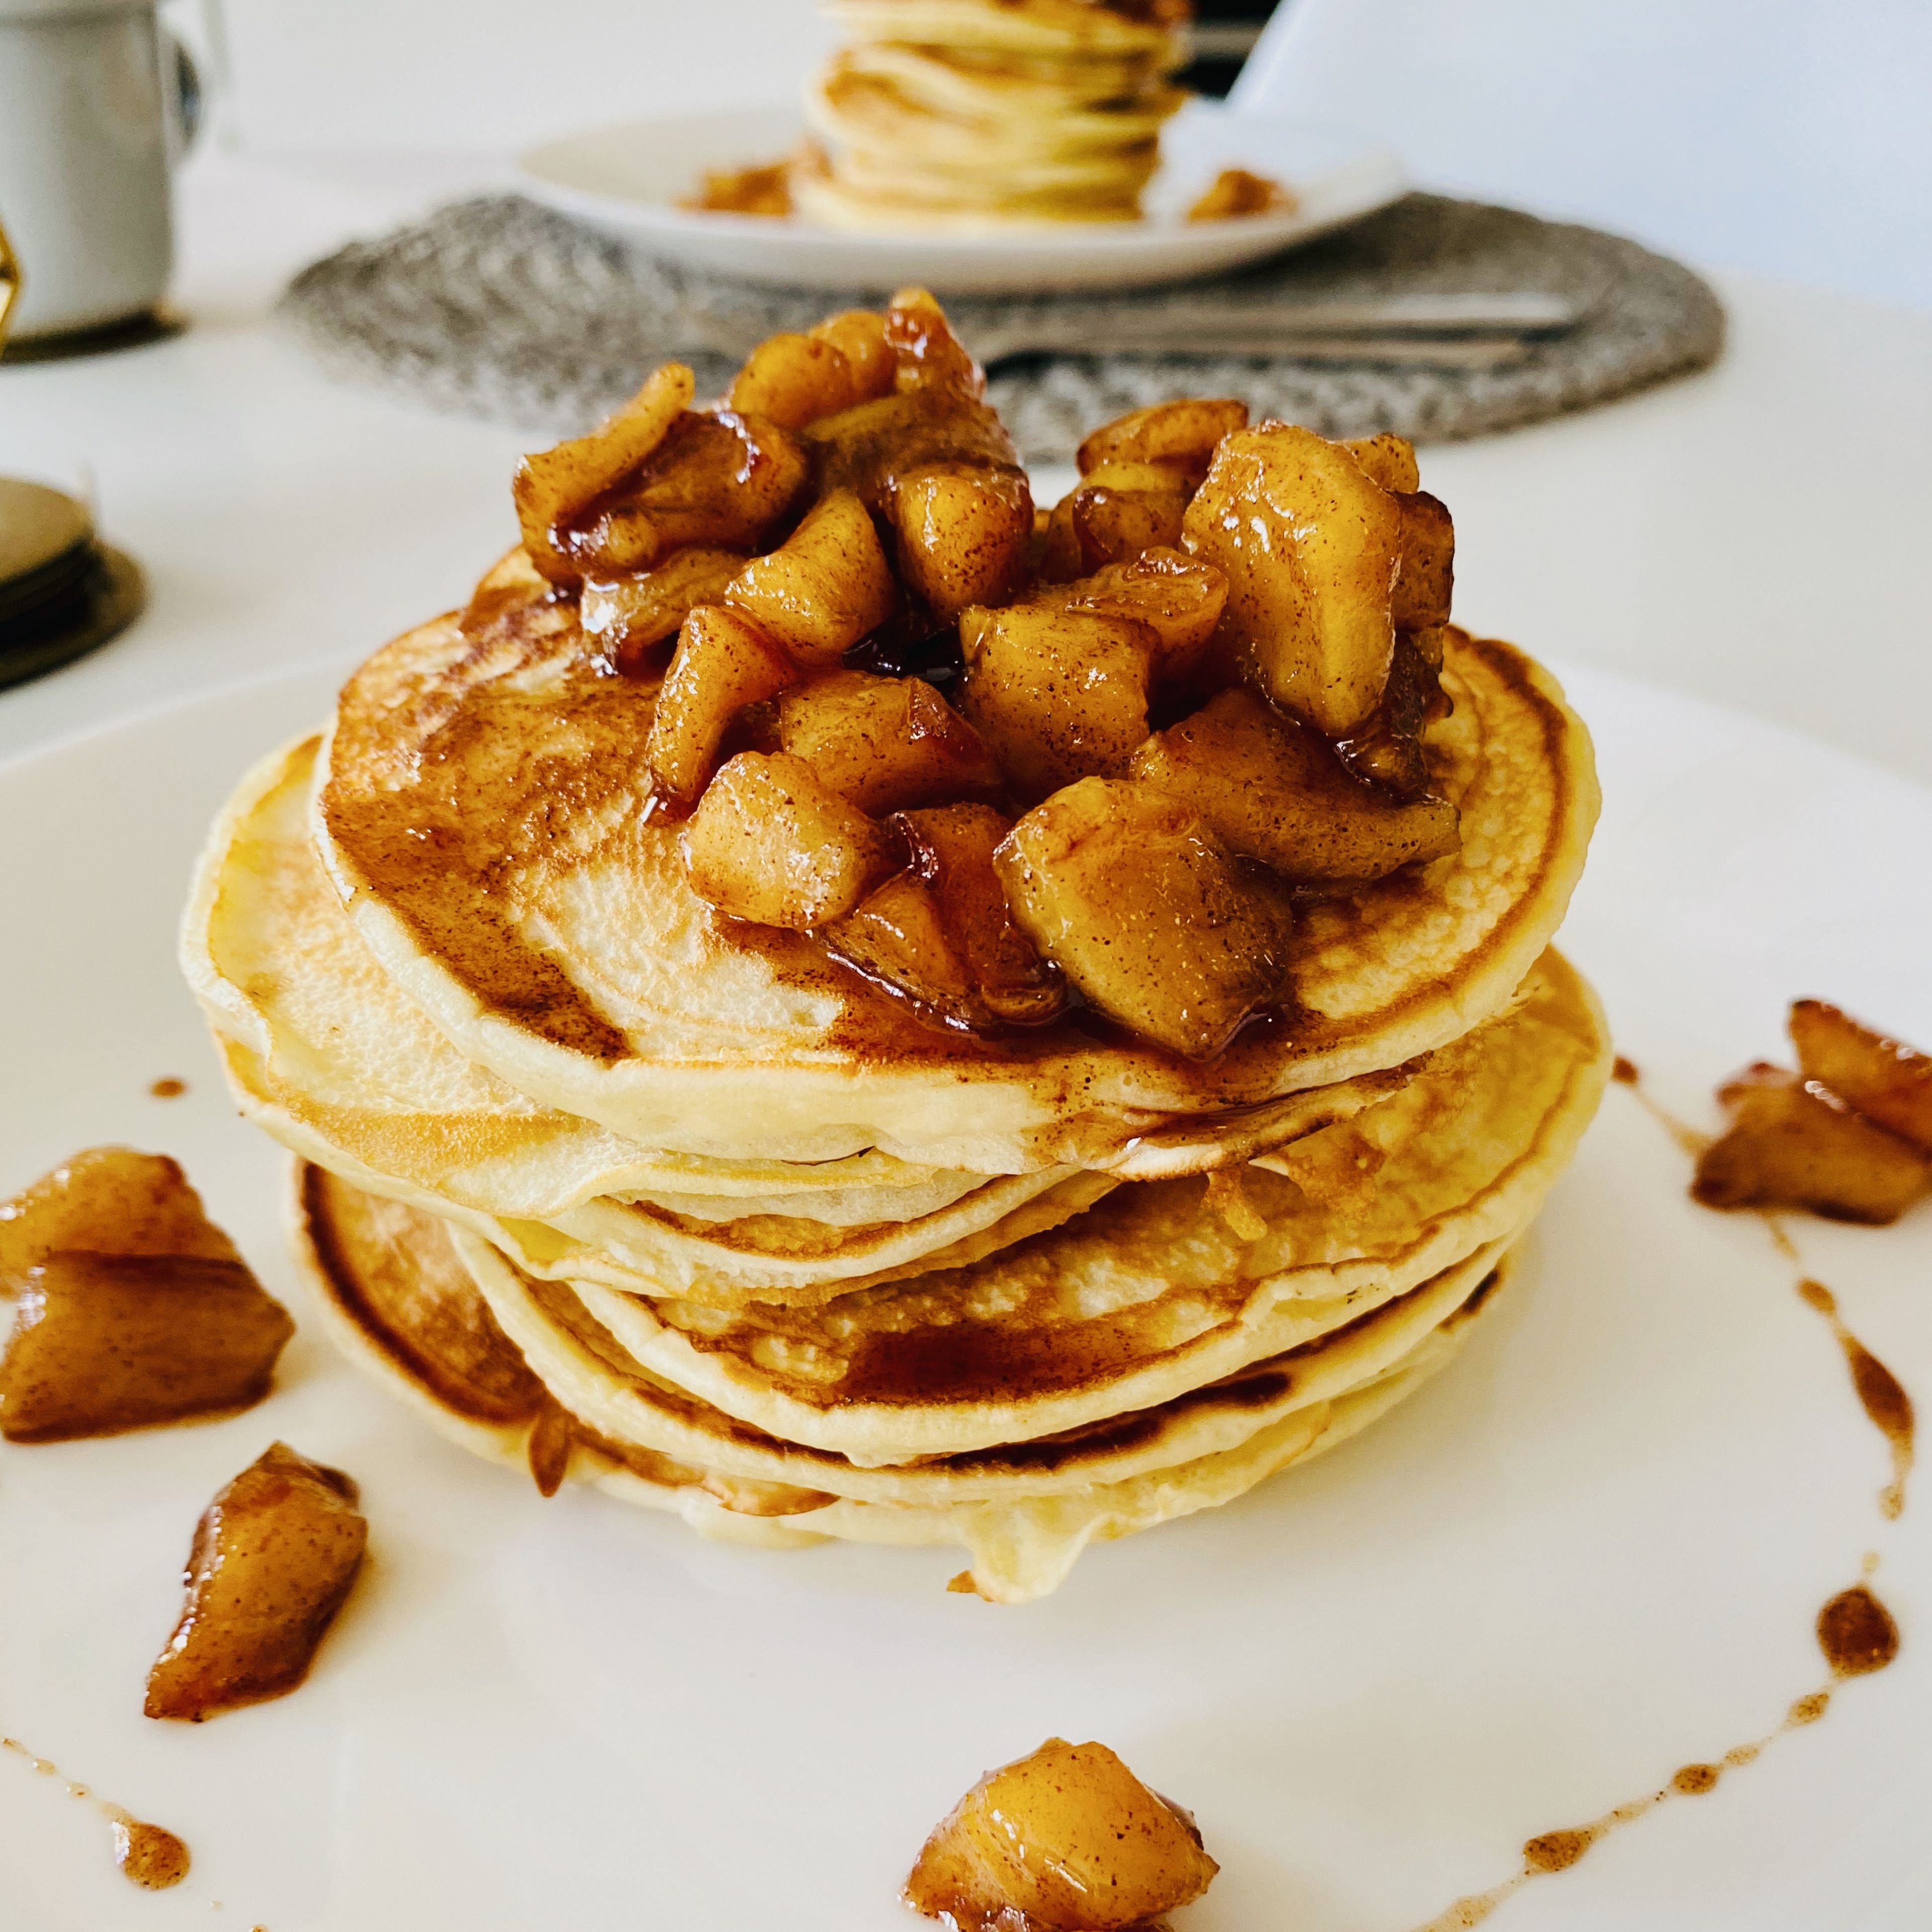 Stack your pancakes on a plate, and place a spoonful of your apples on top and enjoy.